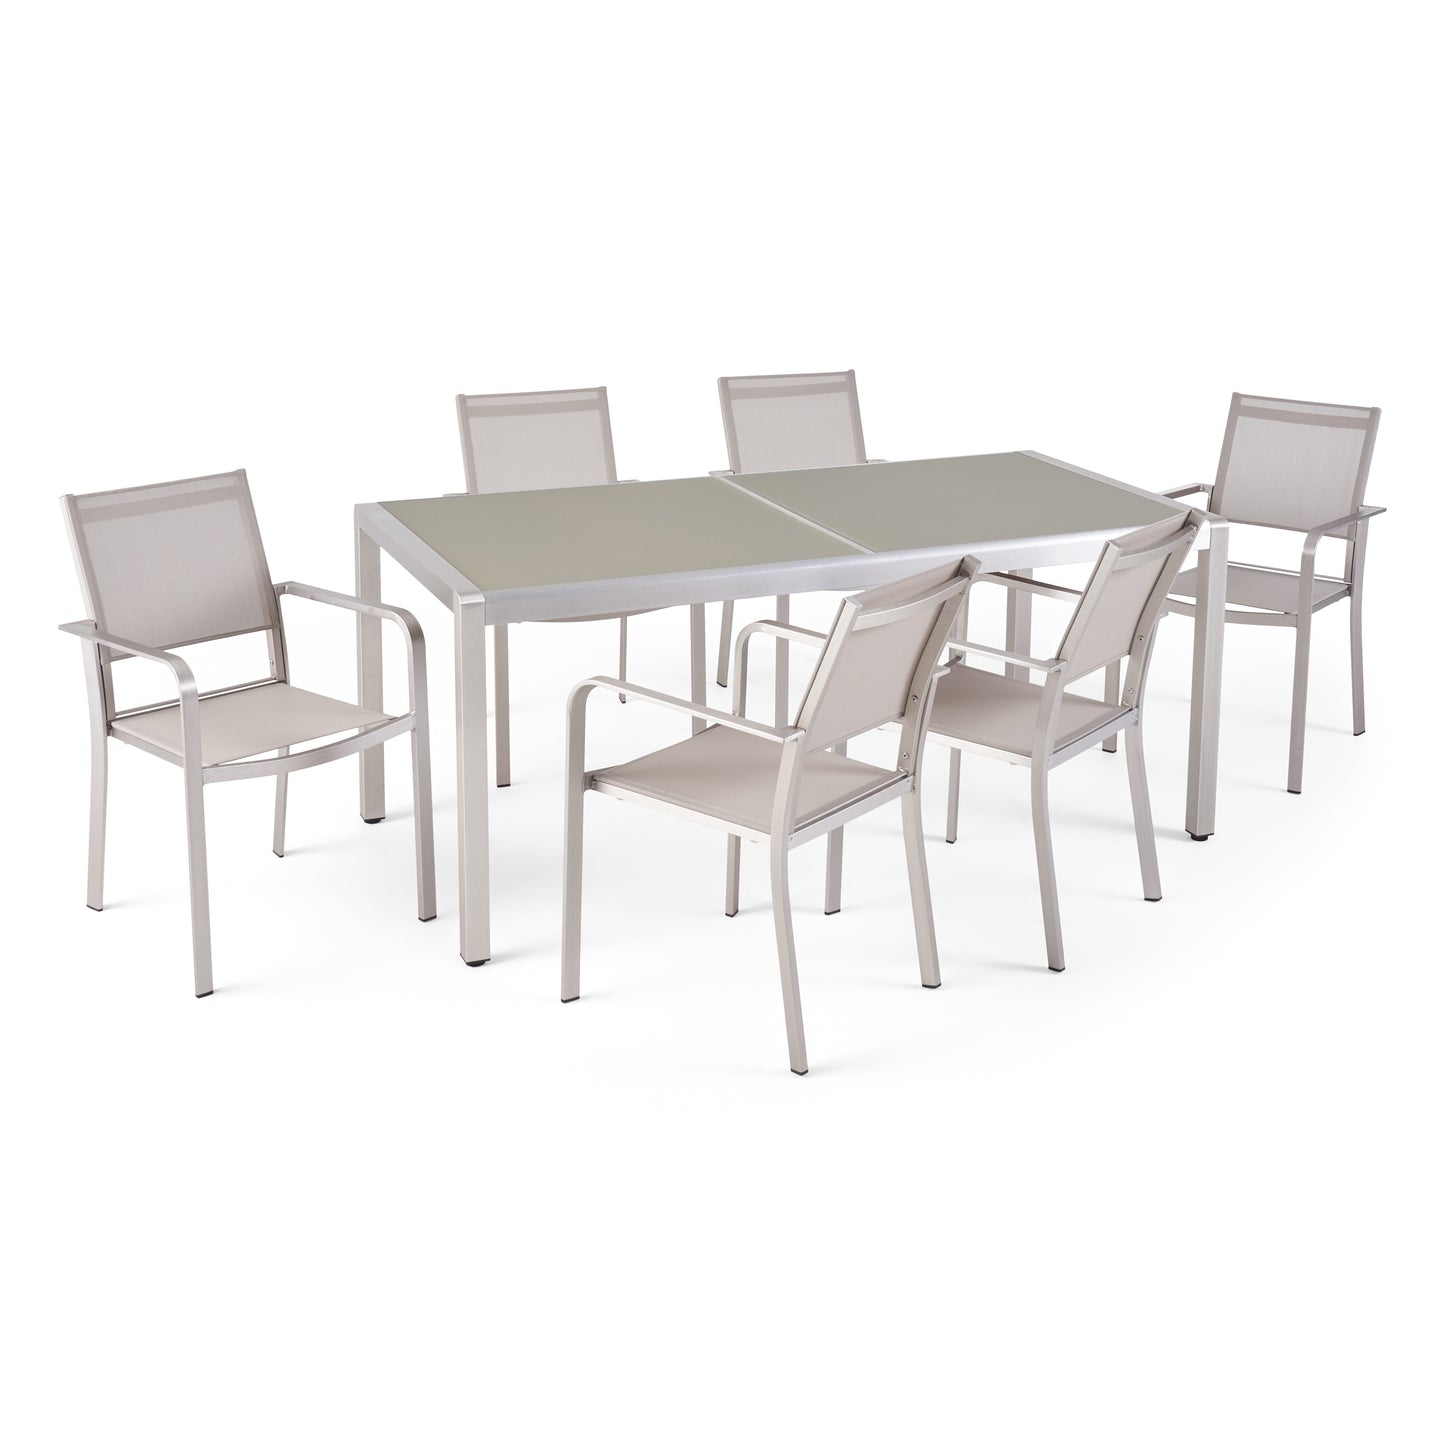 Glauk Outdoor 6 Seater Aluminum Dining Set with Tempered Glass Table Top